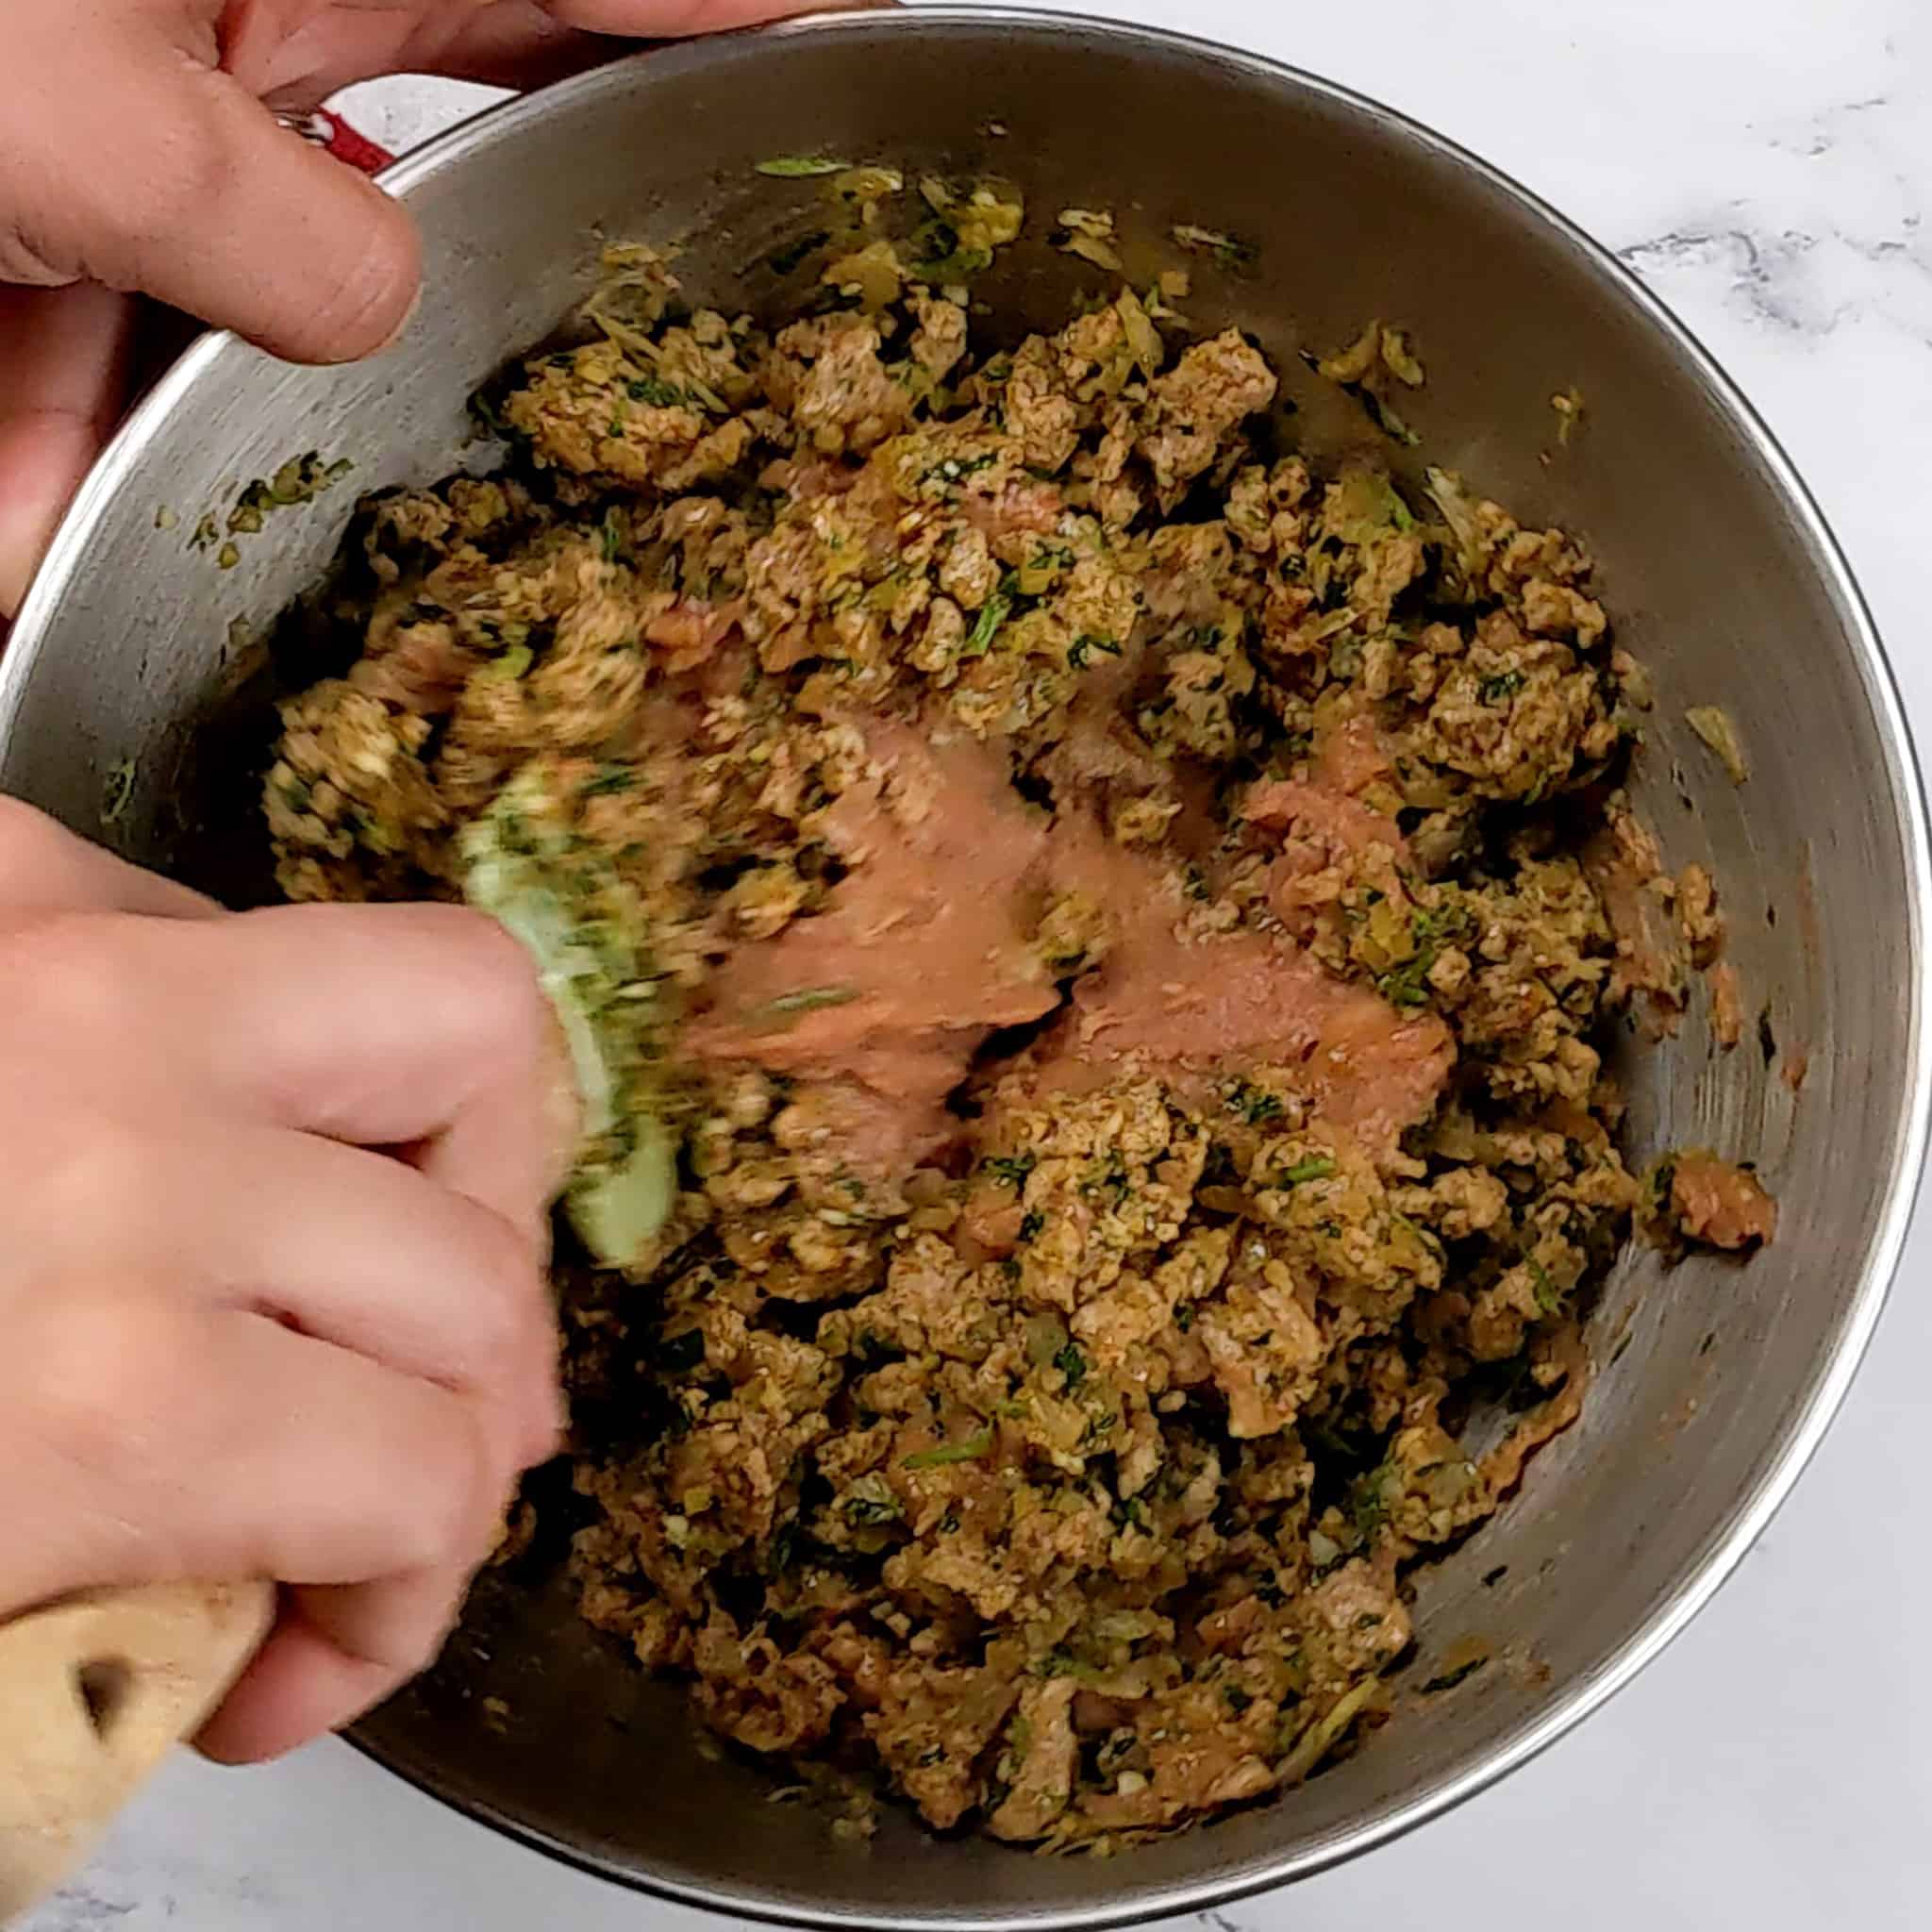 the cooked seasoned ground turkey meat topping the refried beans in a stainless steel mixing bowl being mixed together with a silicon wooden spatula.